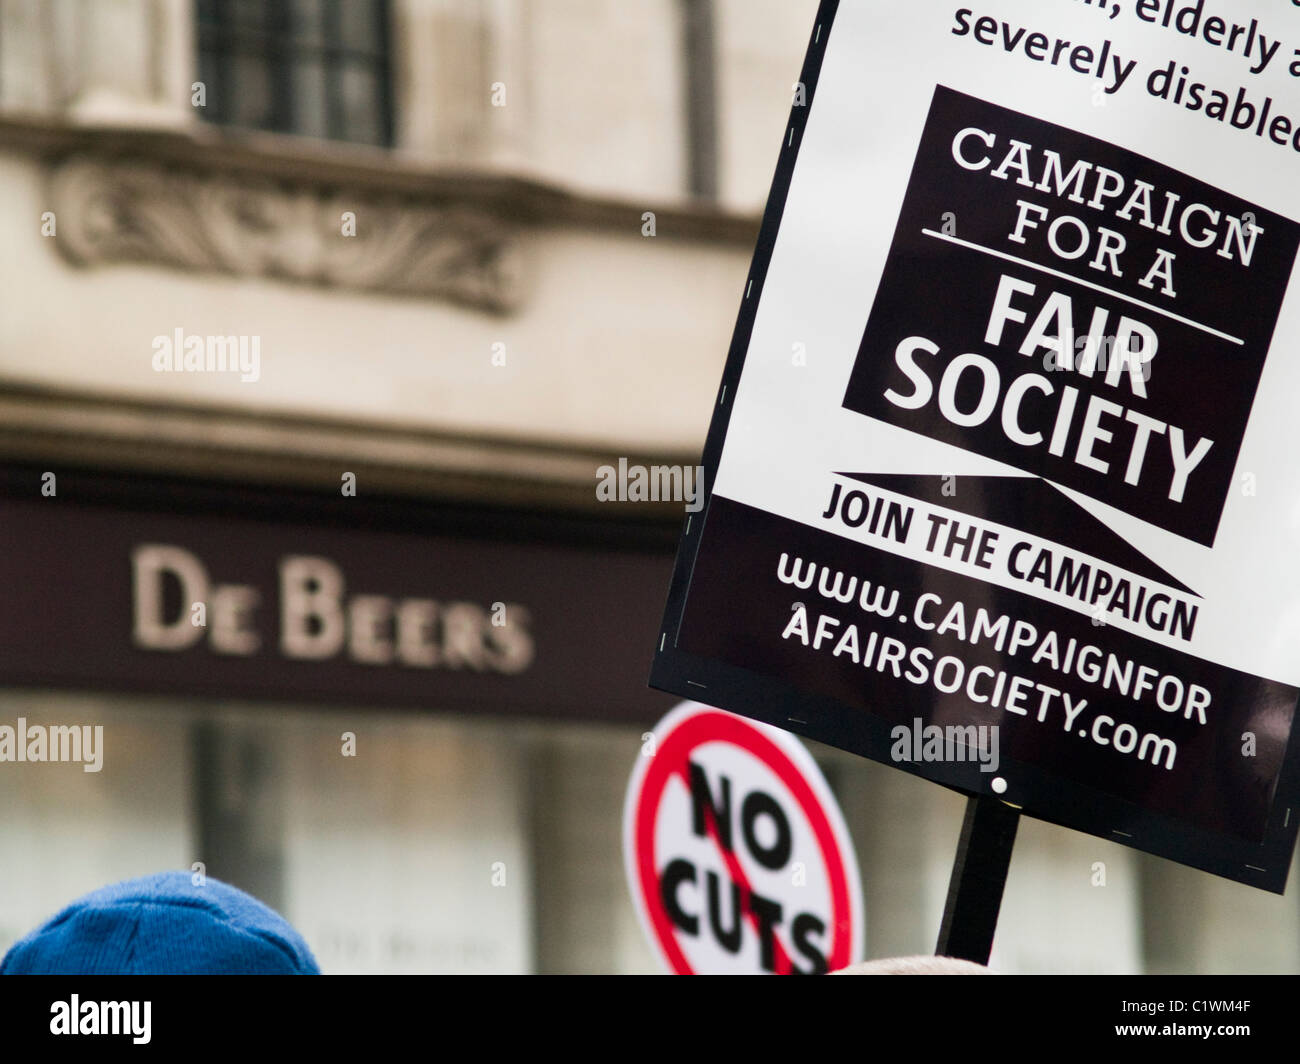 A placard protesting for a fairer society outside of De Beers Jewelers in Piccadilly London on 26 March Stock Photo